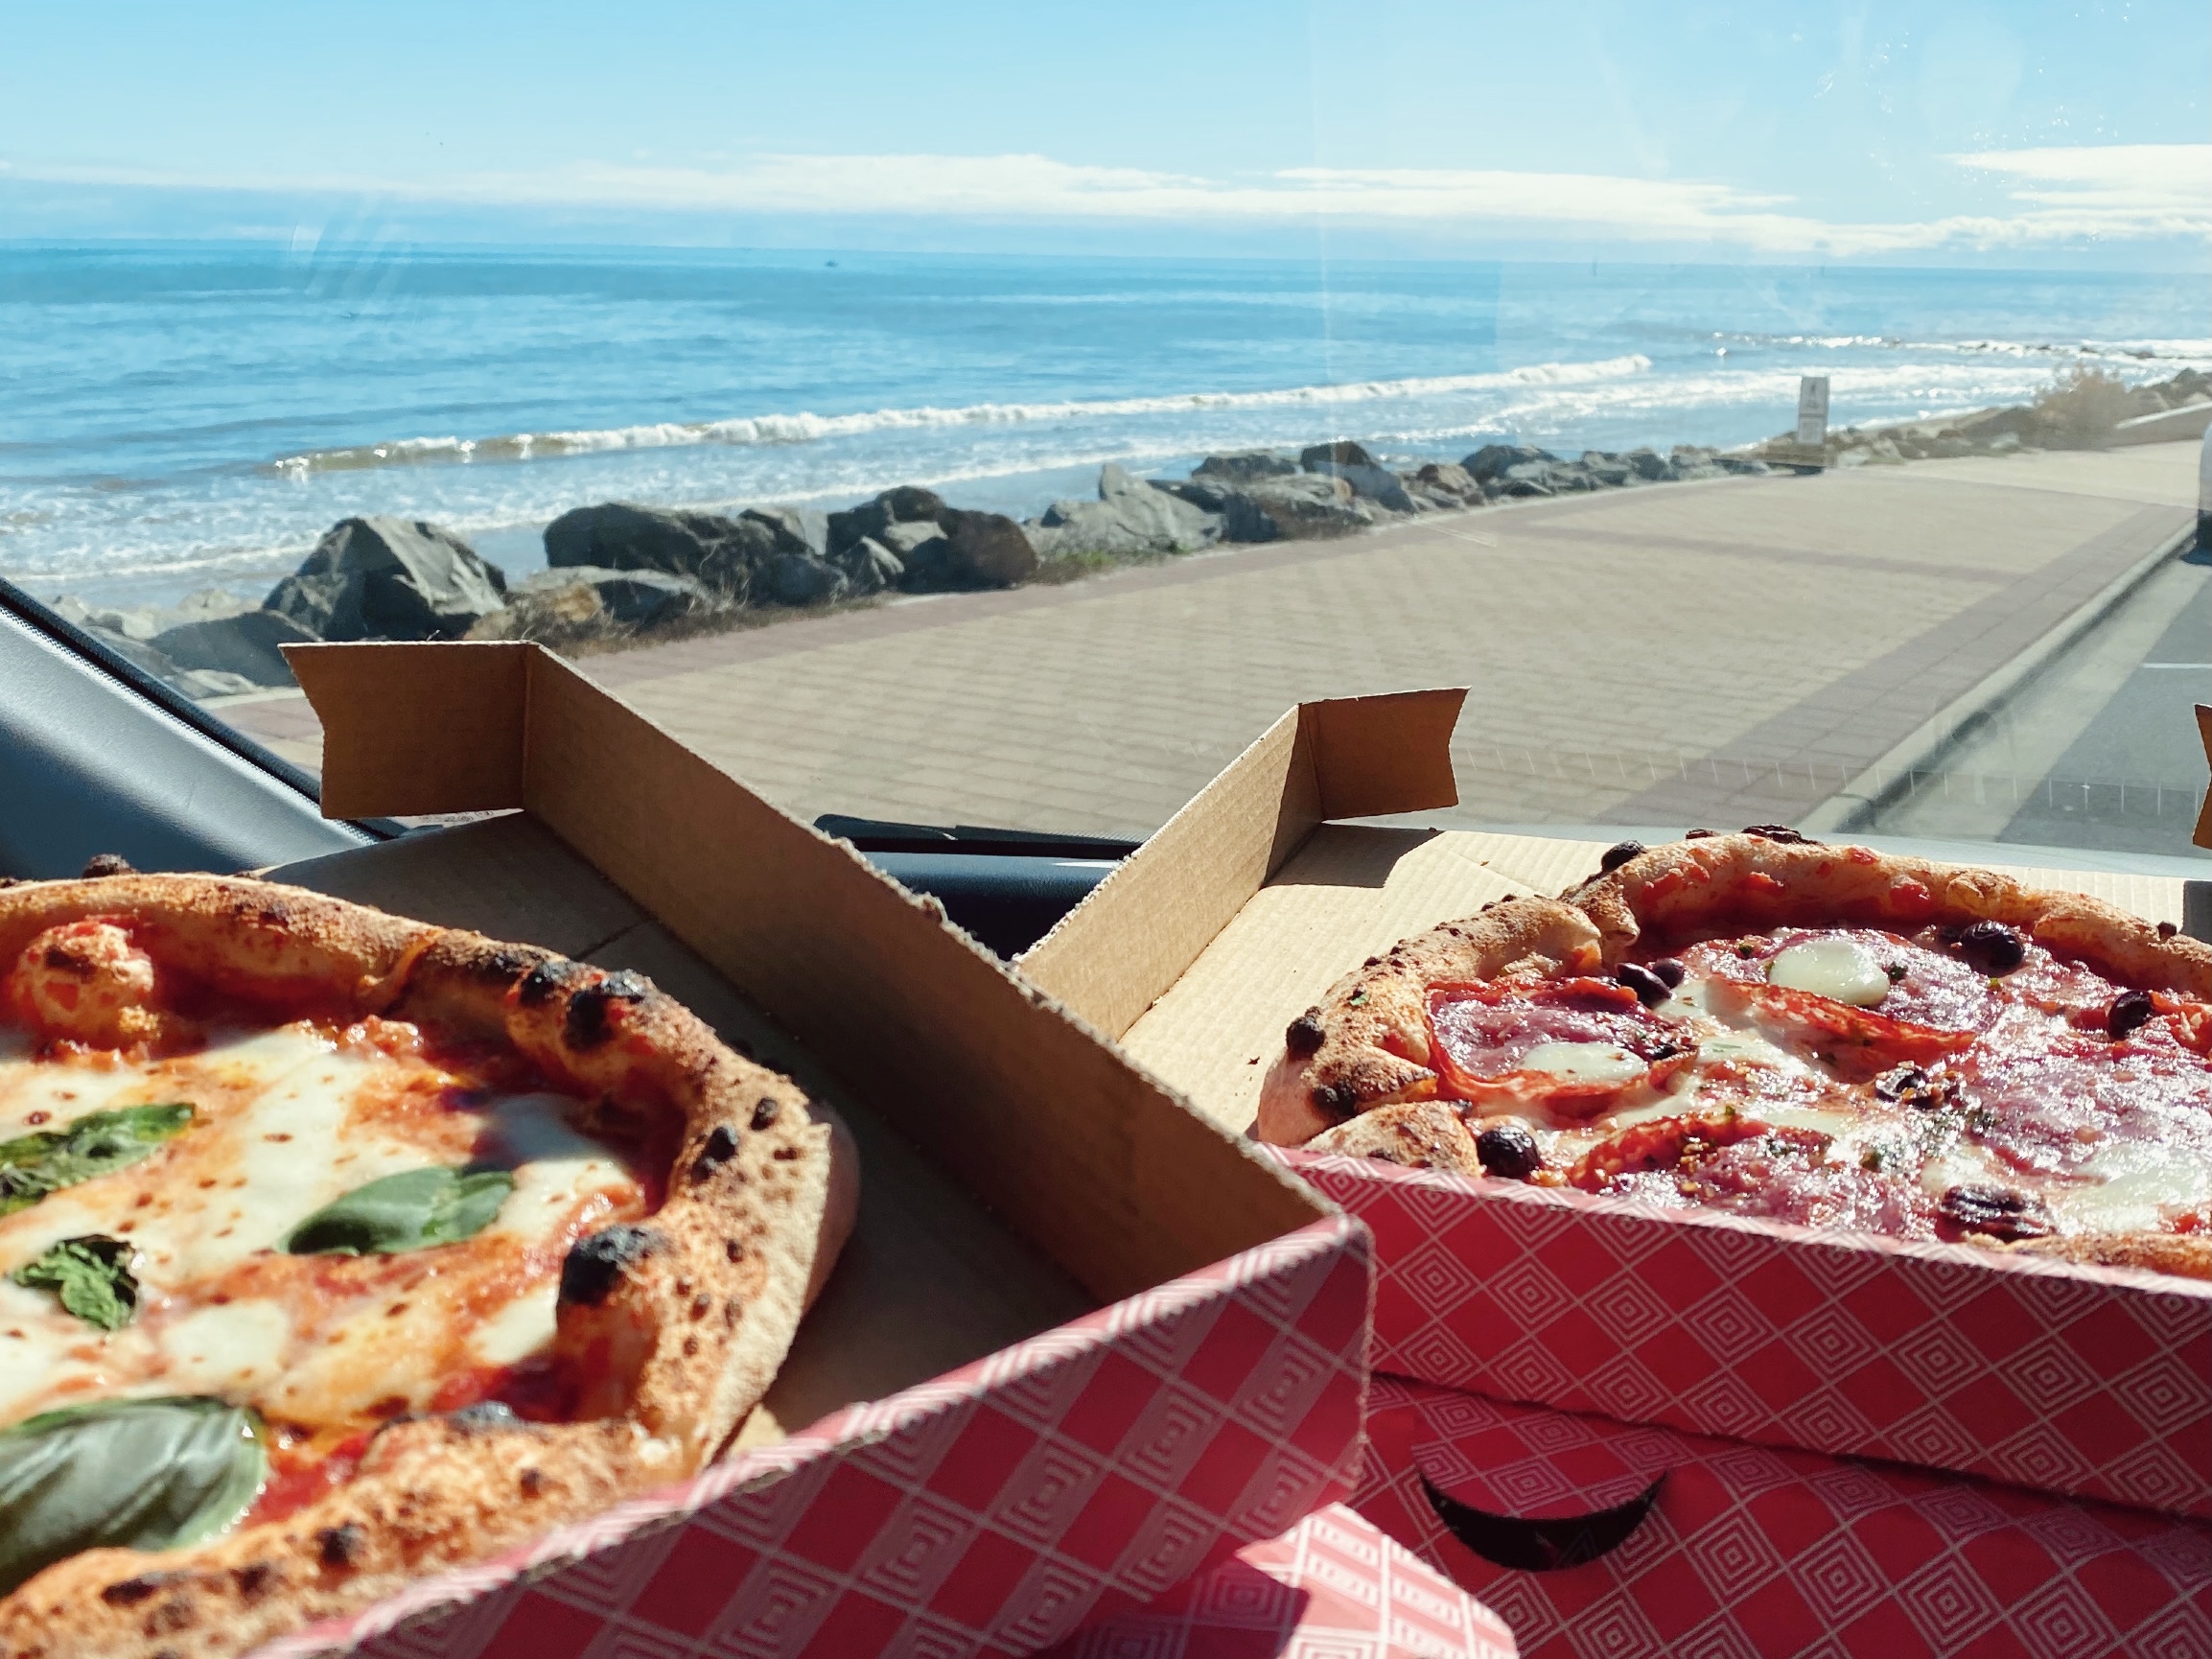 Next stop: Seaside Pizza Perfection